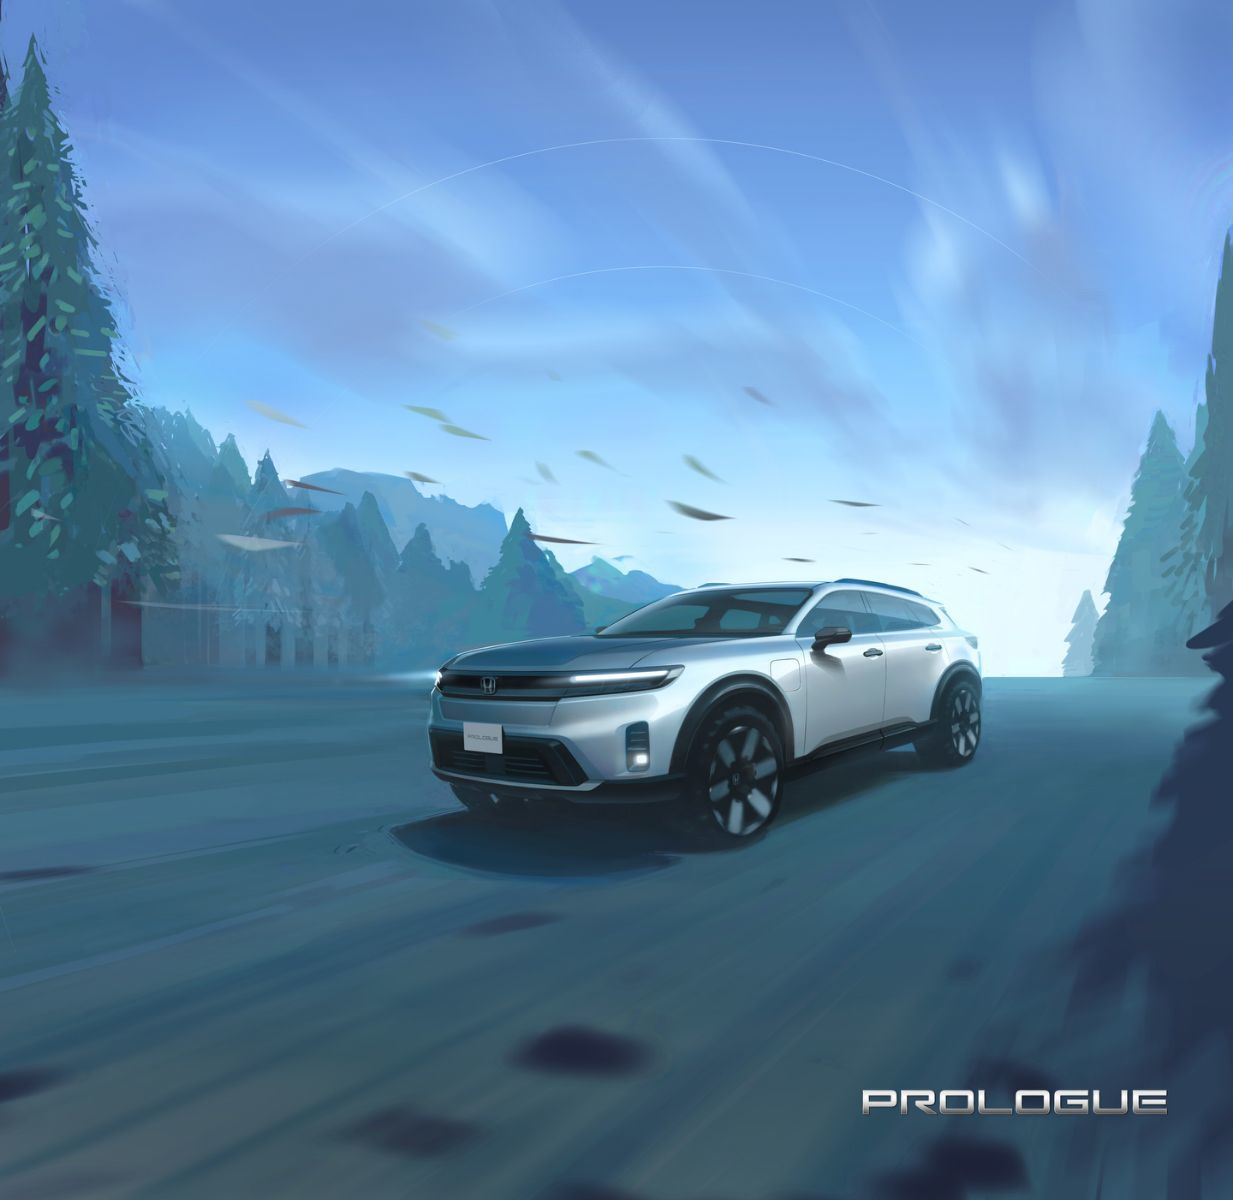 Our first official sketch of the 2024 Honda Prologue SUV